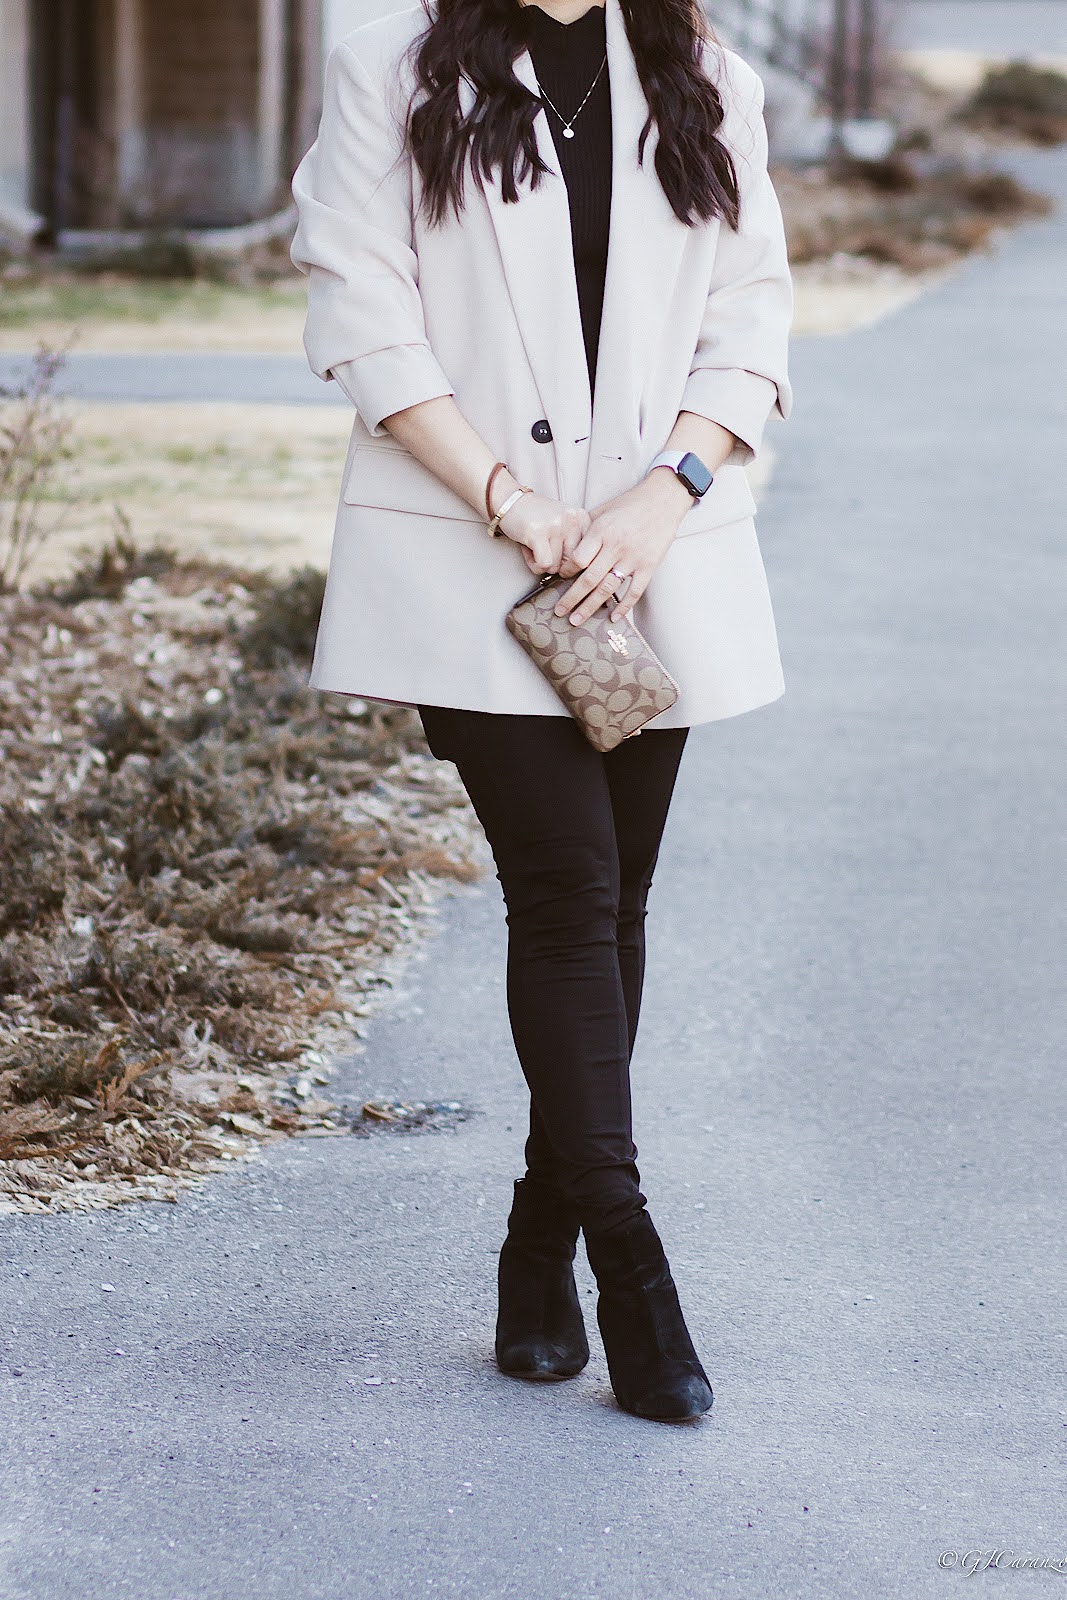 Zara Oversized Blazer_Tights_Steve Madden Suede Booties_Gucci Sunglasses_HM Hat_Coach Wrislet_Petite Fashion_Spring Outfit_Neutral Outfit_Chic Look